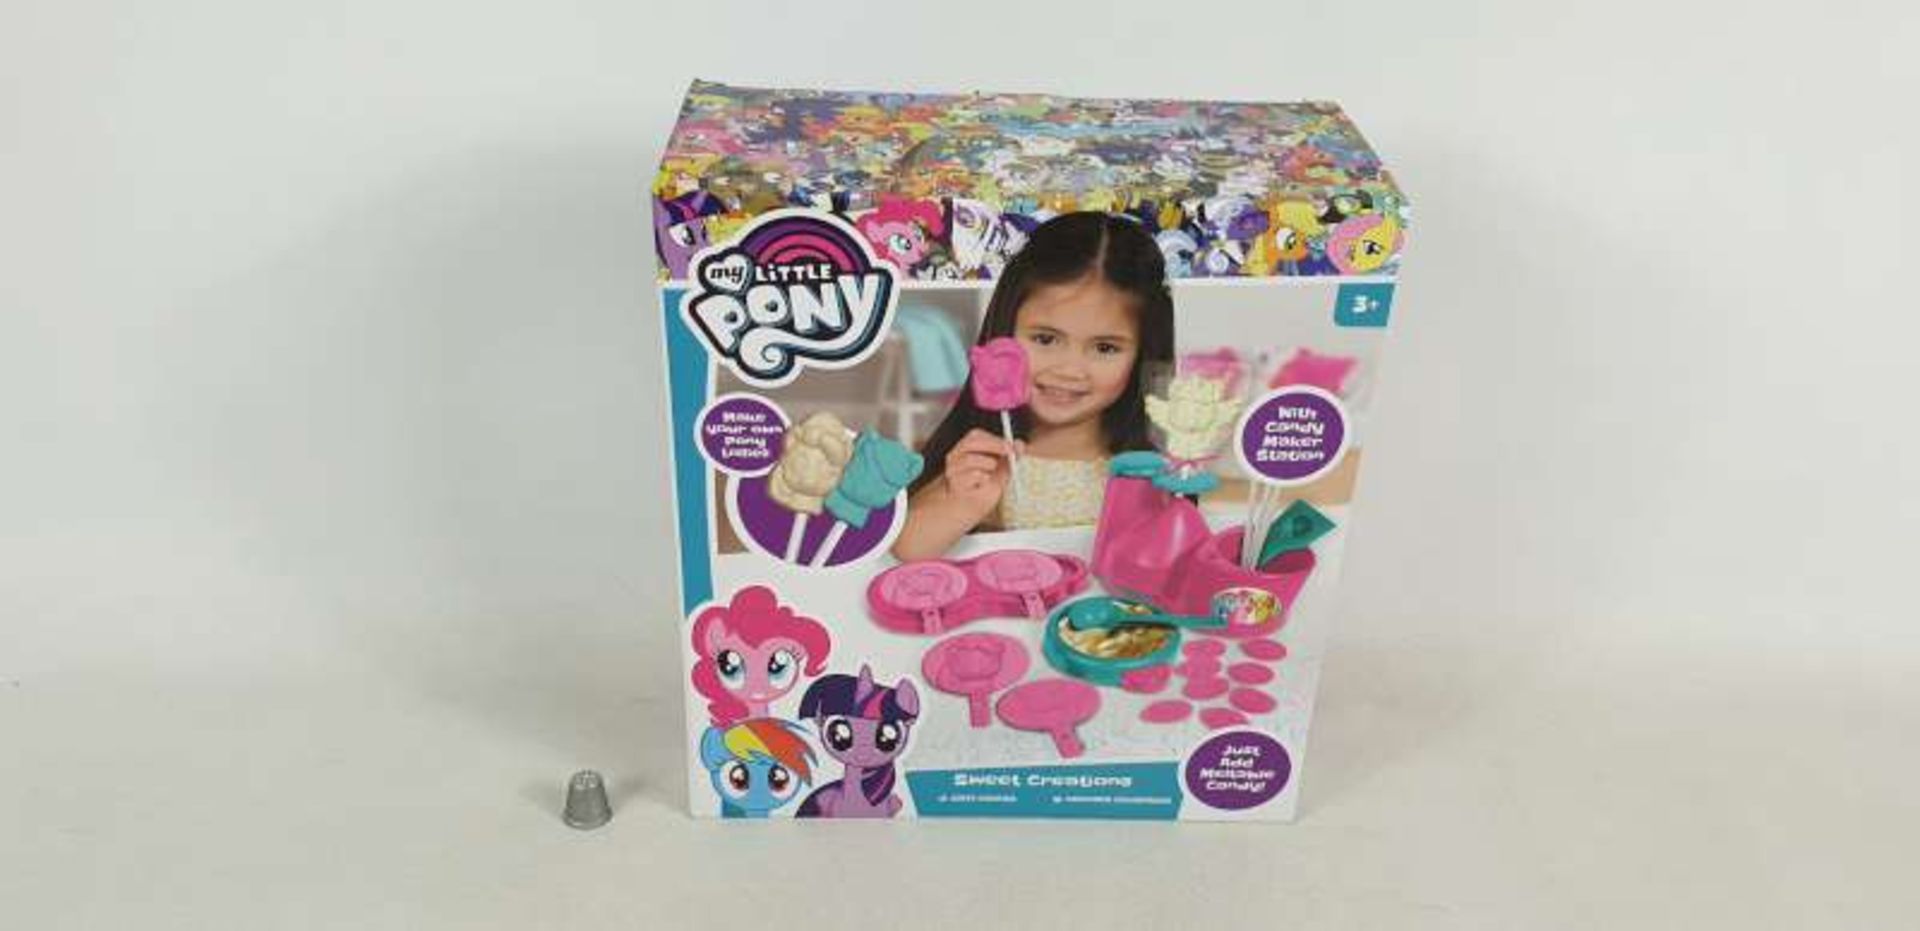 40 X BRAND NEW BOXED MY LITTLE PONY SWEET CREATIONS IN 5 BOXES